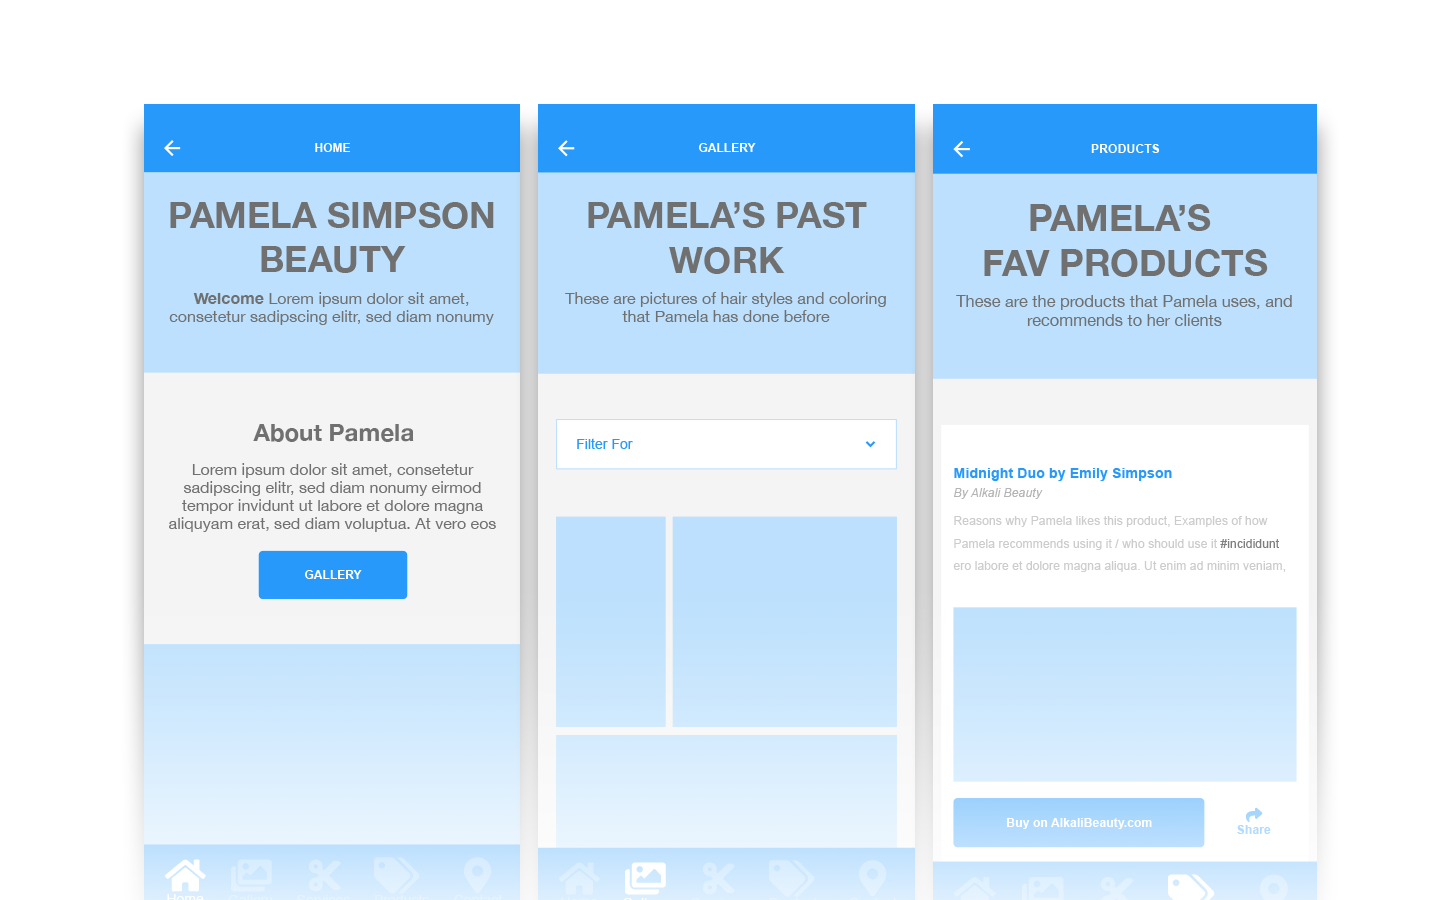 The mobile wireframes that I created for this project